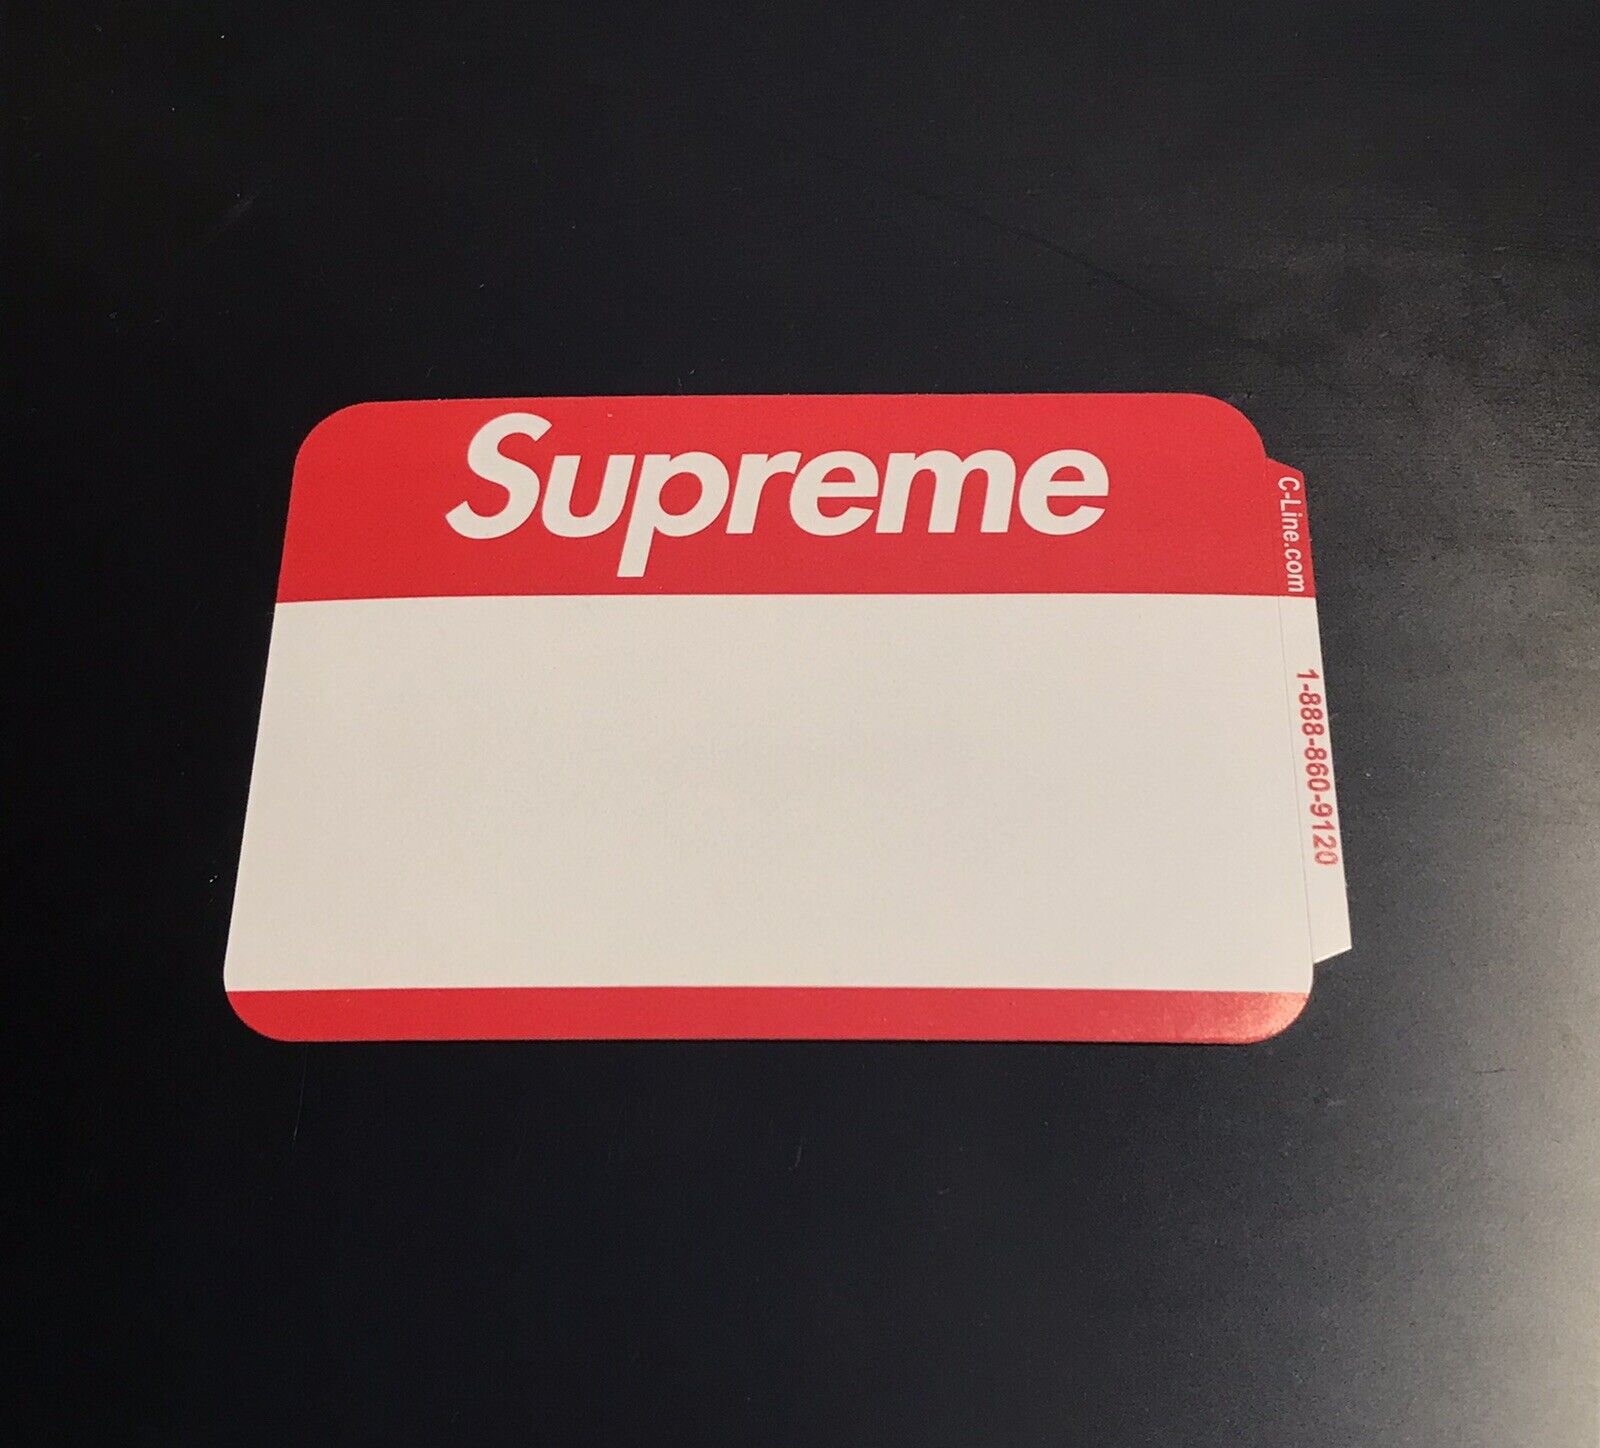 Will ship ASAP $10 each pack of 4 Supreme sticker 4 pack